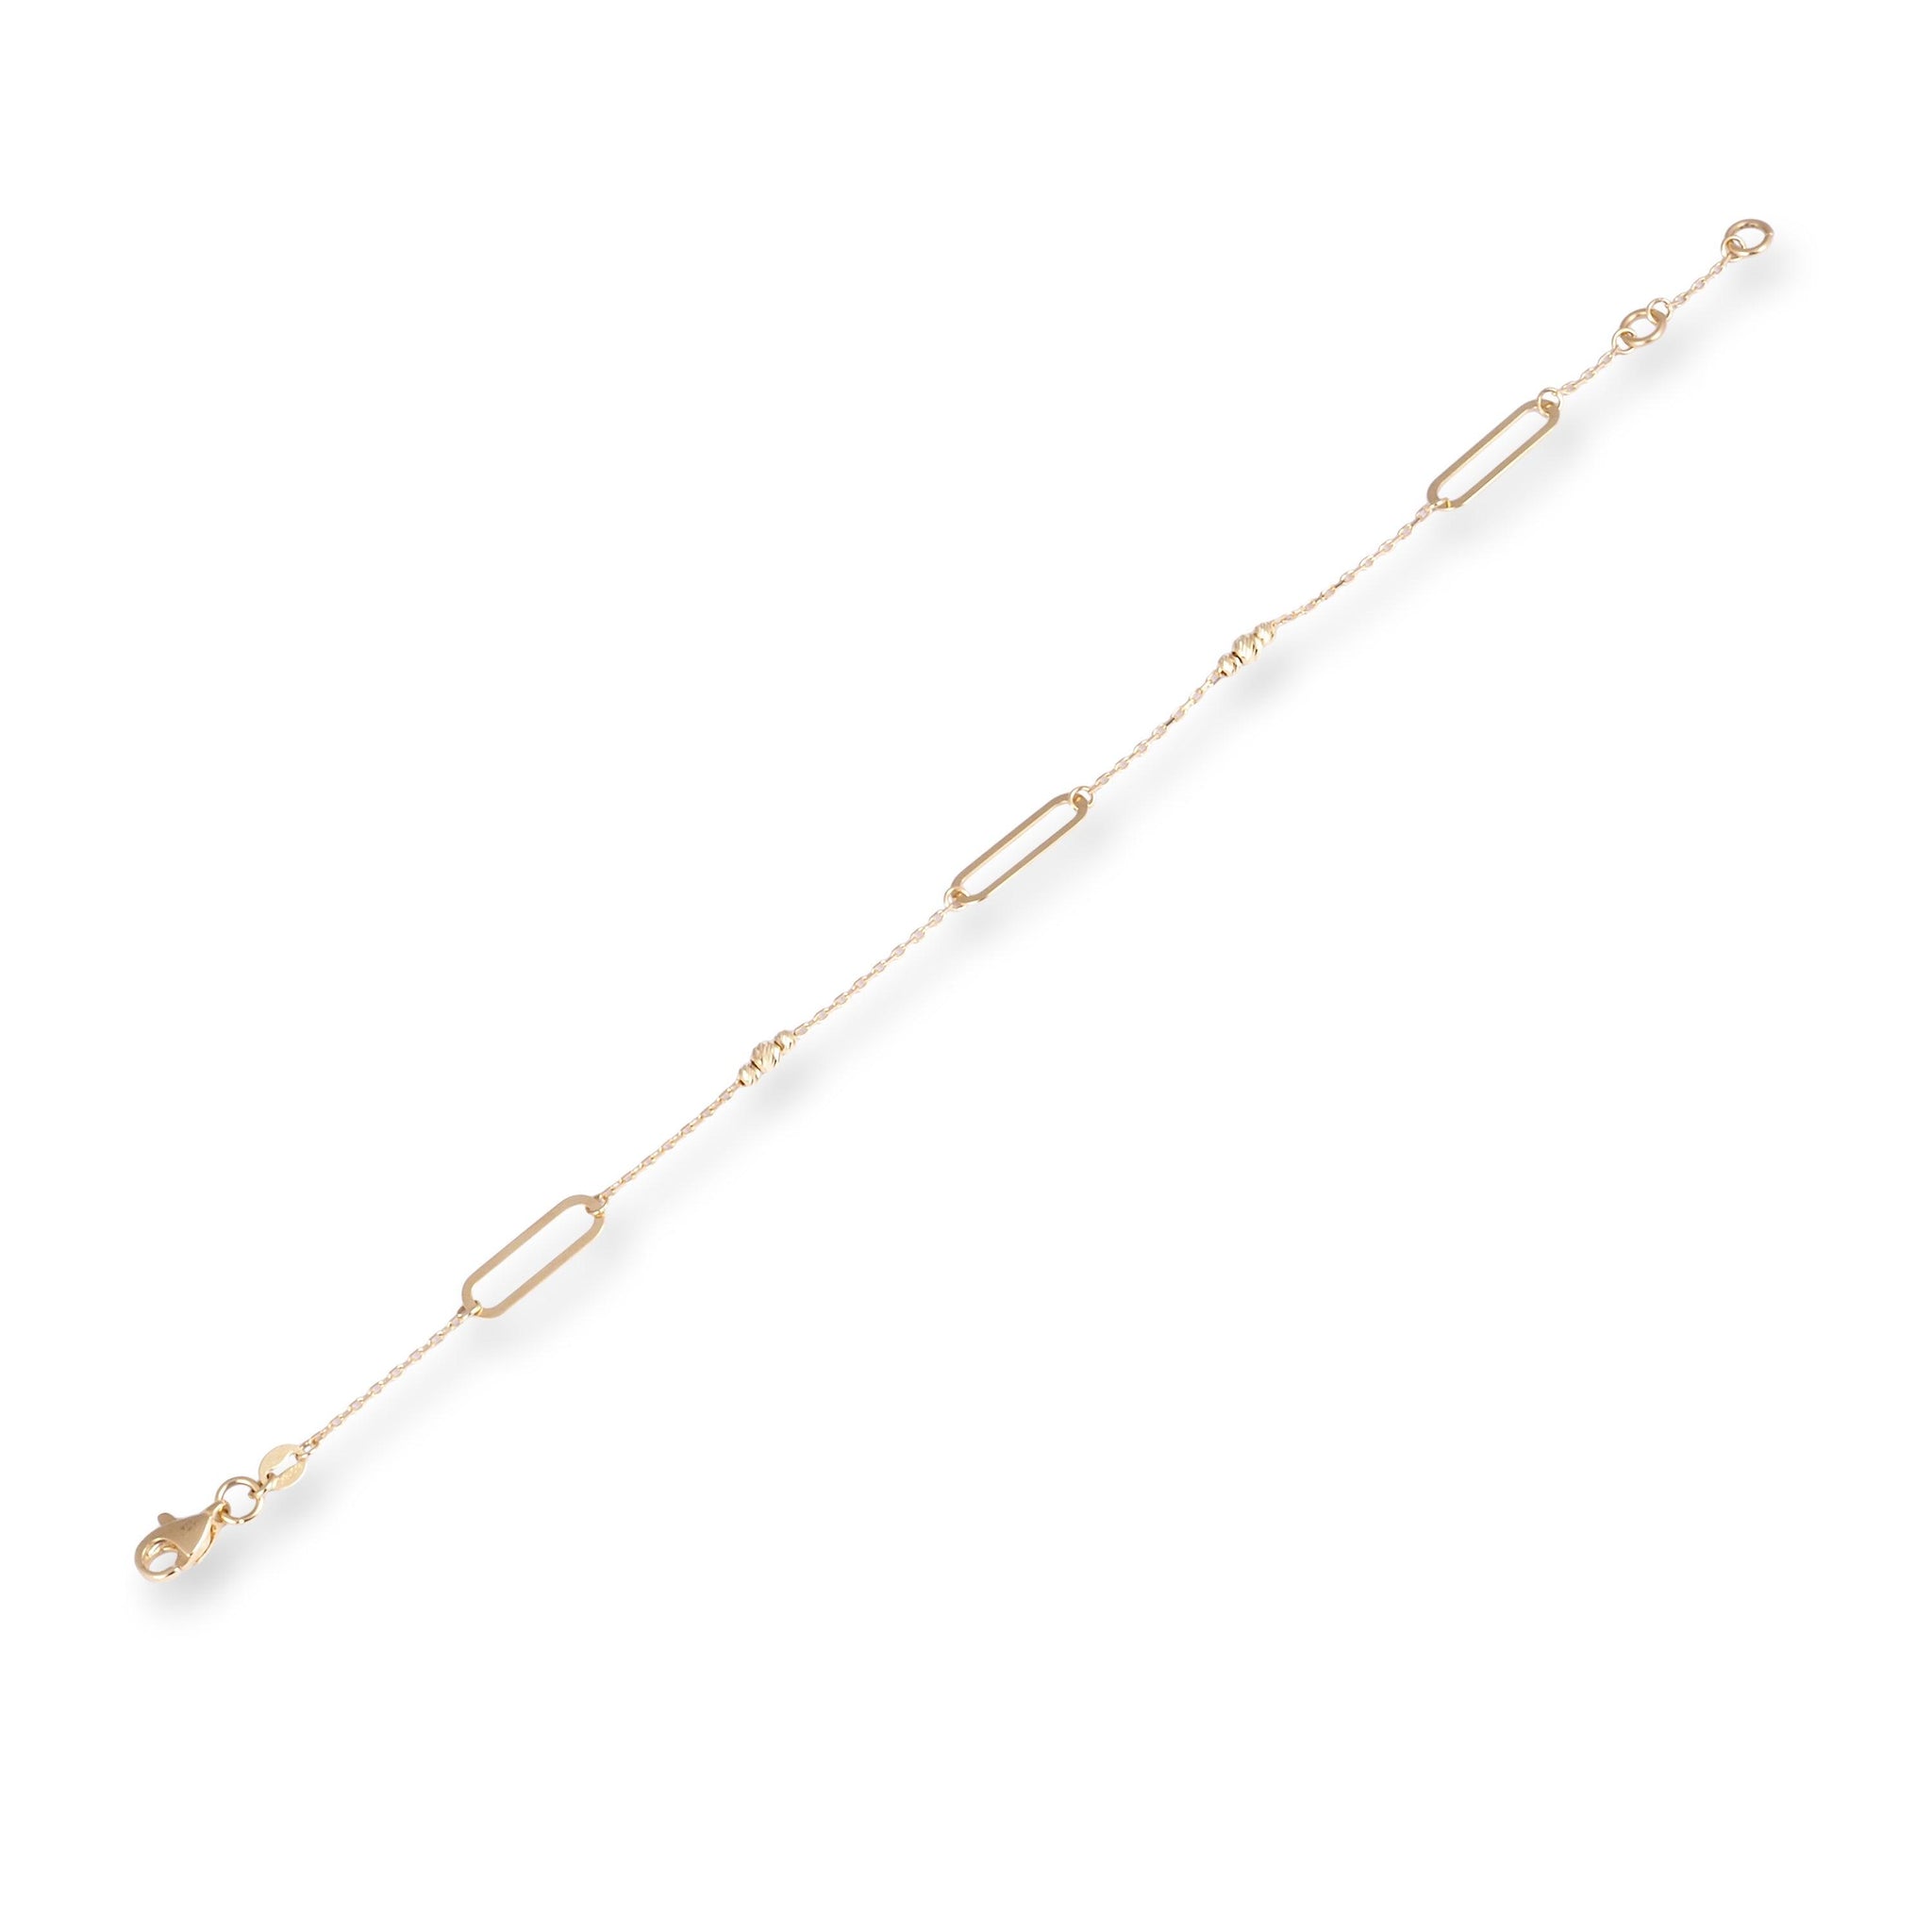 18ct Yellow Gold Bracelet with Links, Beads and Lobster Clasp LBR-8489